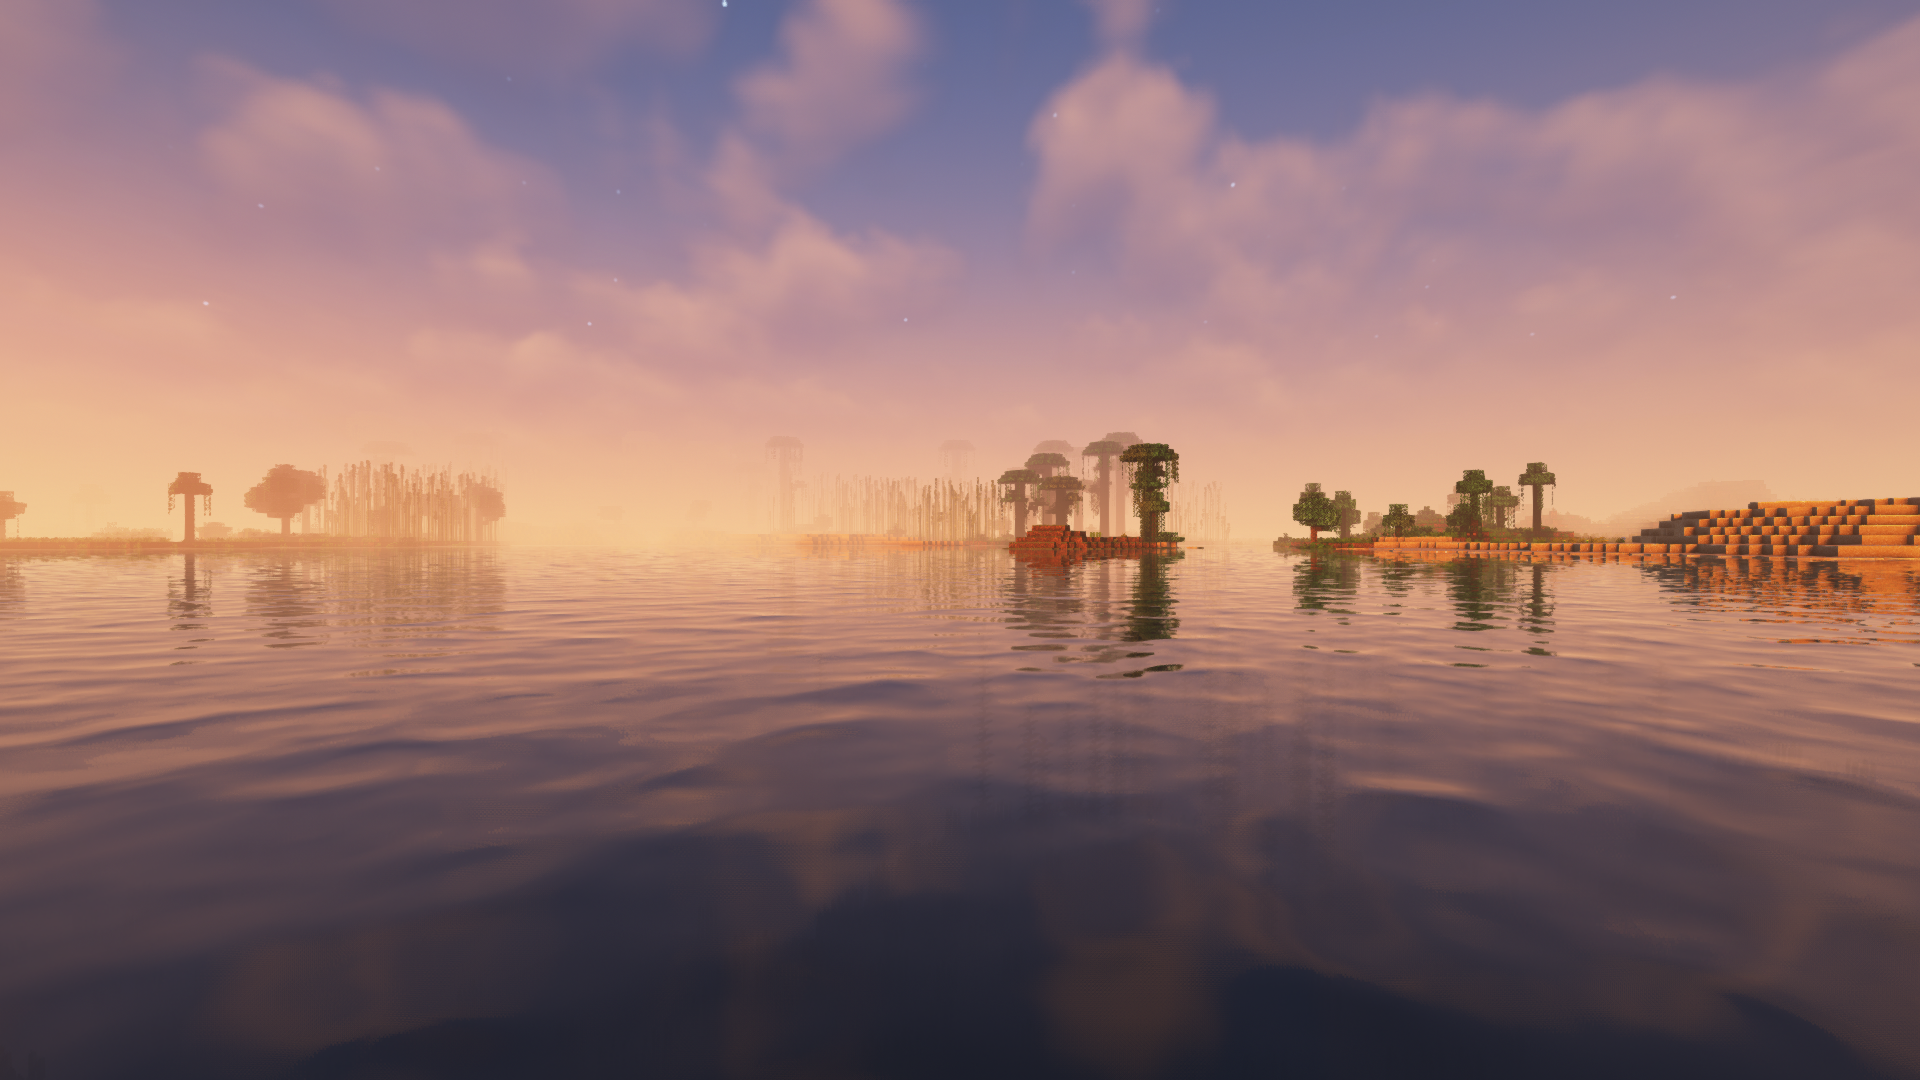 Minecraft Shaders William Wythers Overhauled Overworld Nature Video Games Water 1920x1080